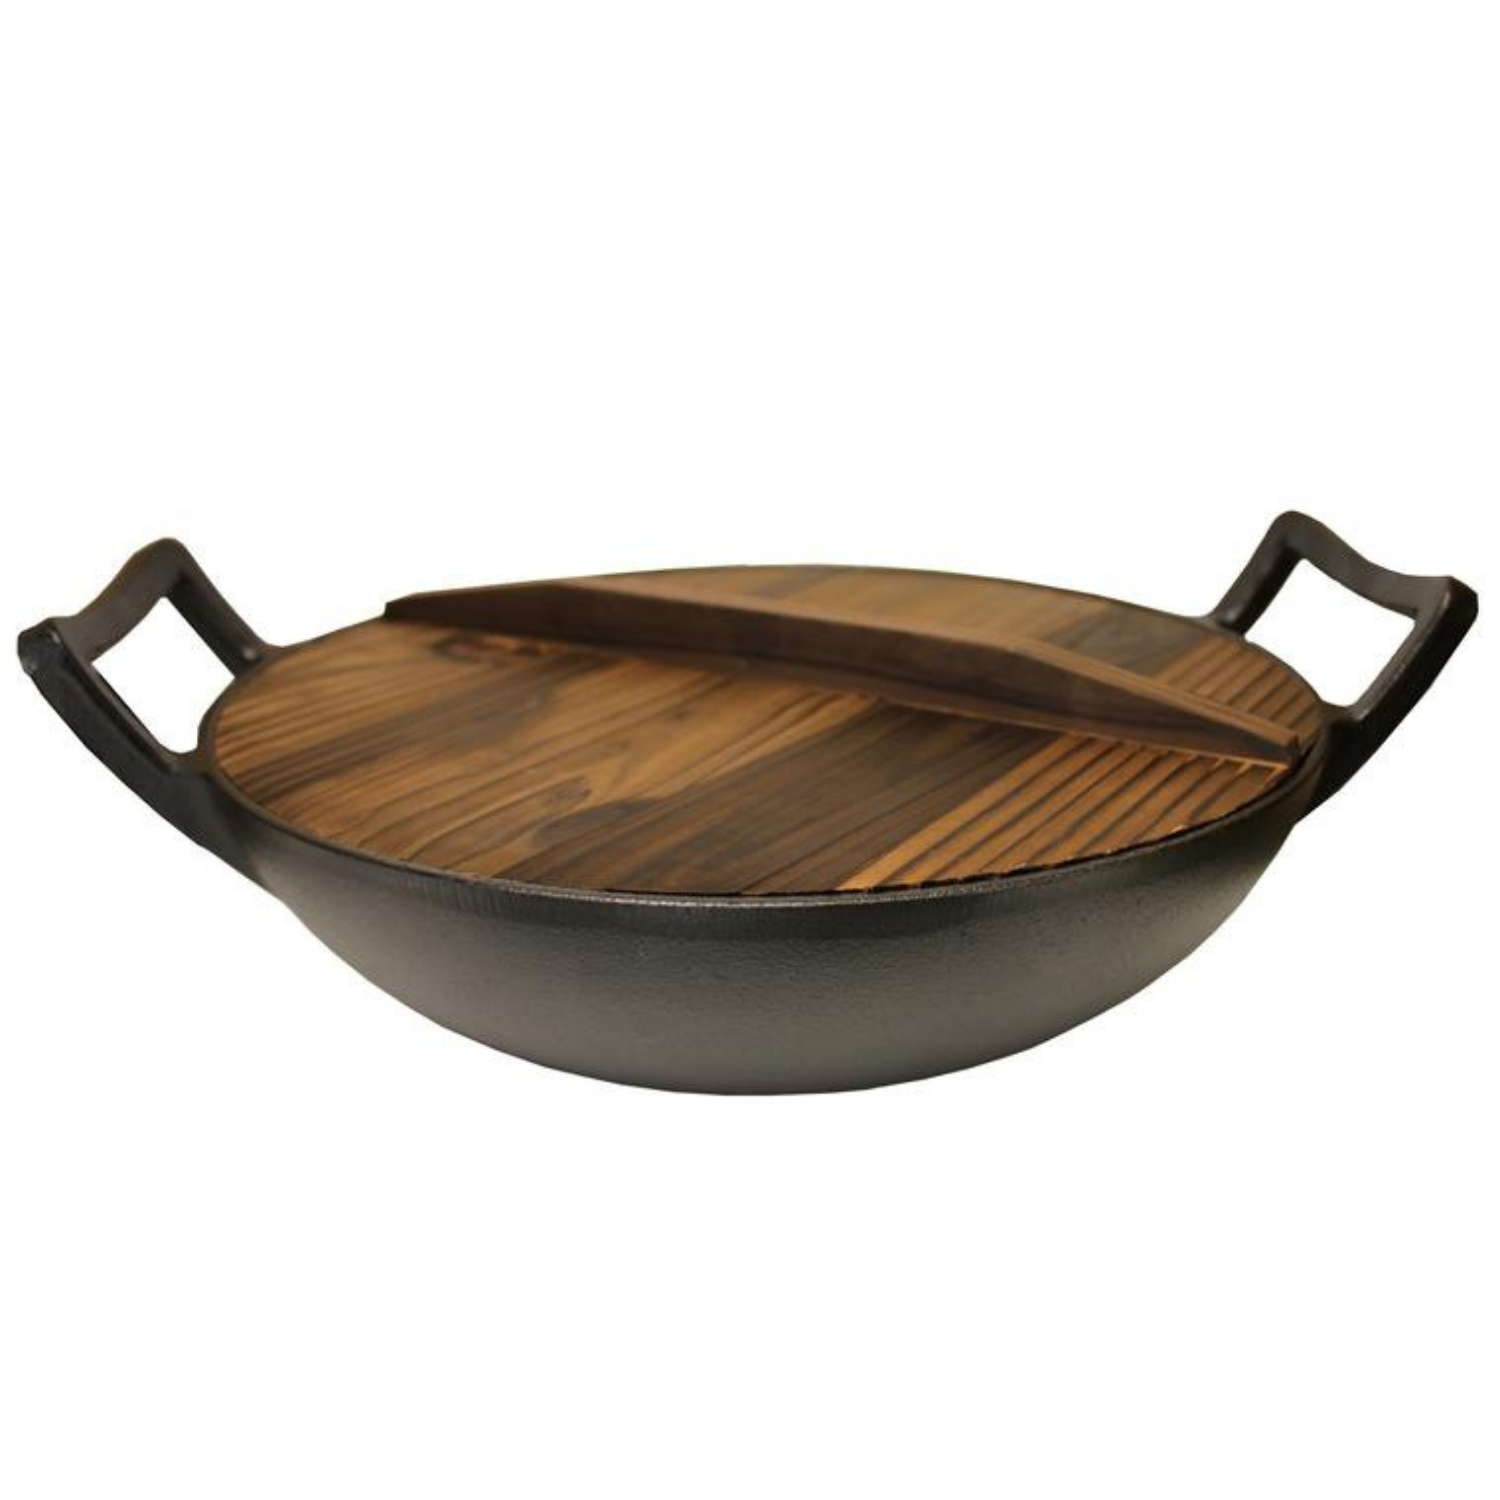 Kaisan house cast iron wok with wooden lid